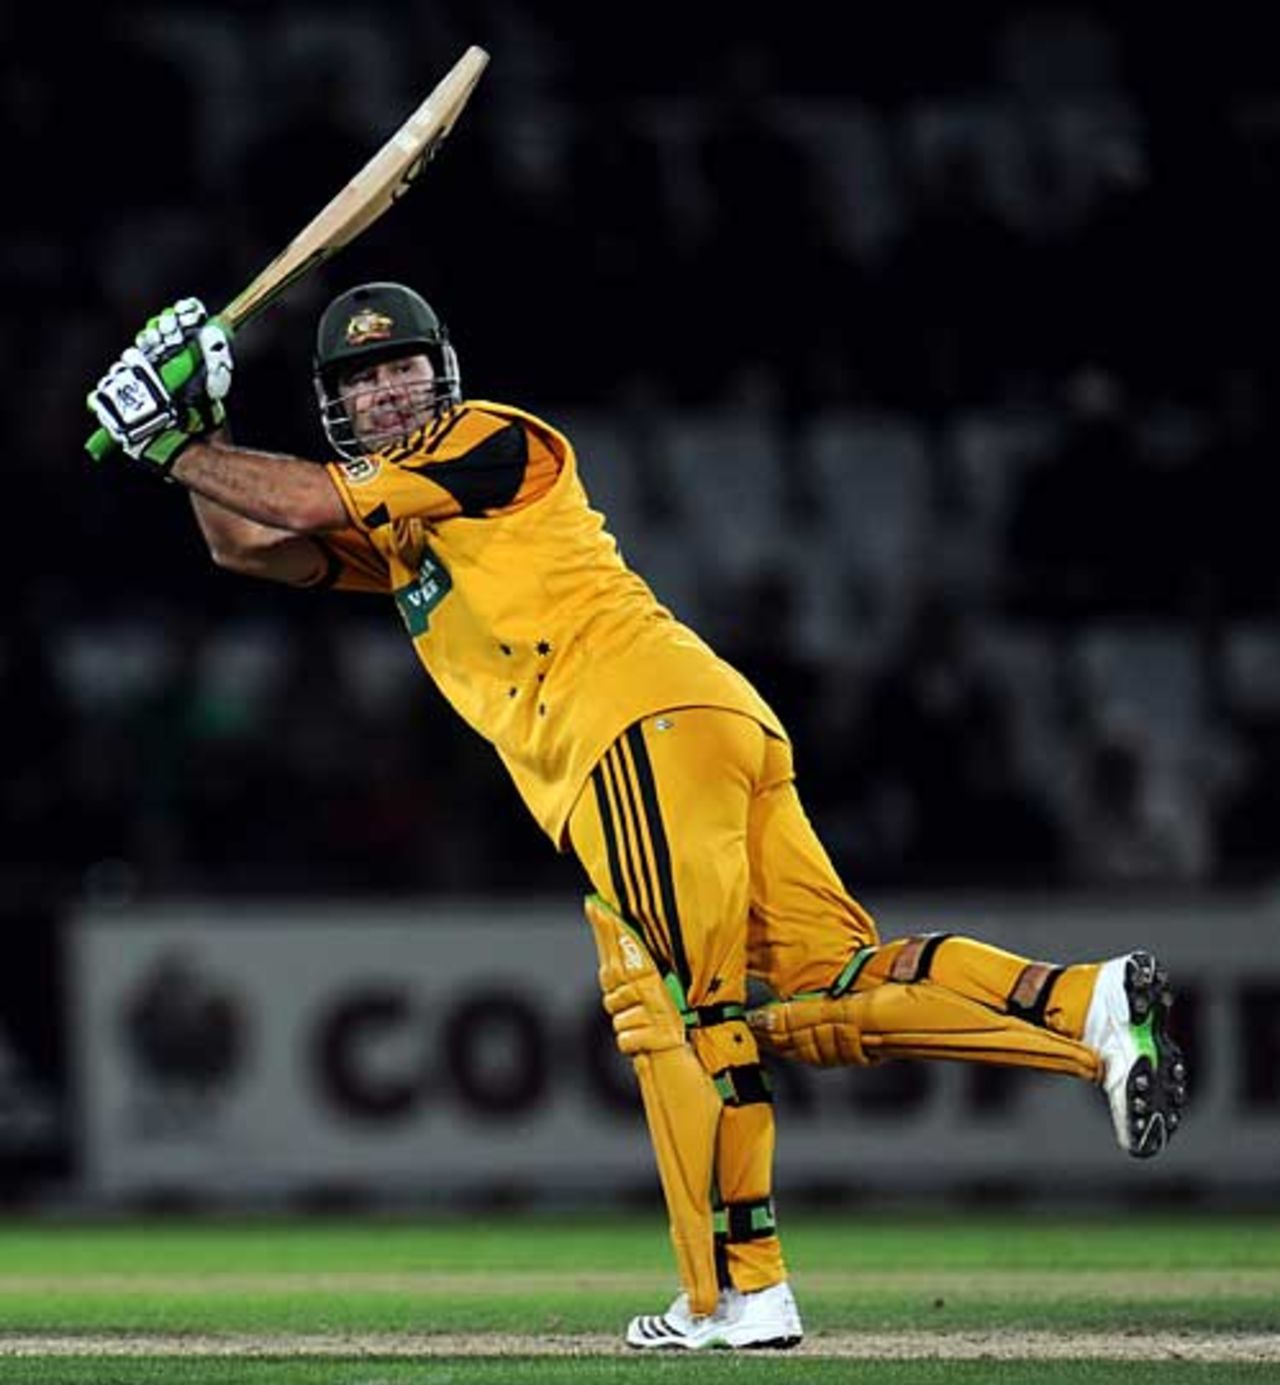 Ricky Ponting didn't put a foot wrong during his 126, England v Australia, 5th ODI, Trent Bridge, September 15, 2009